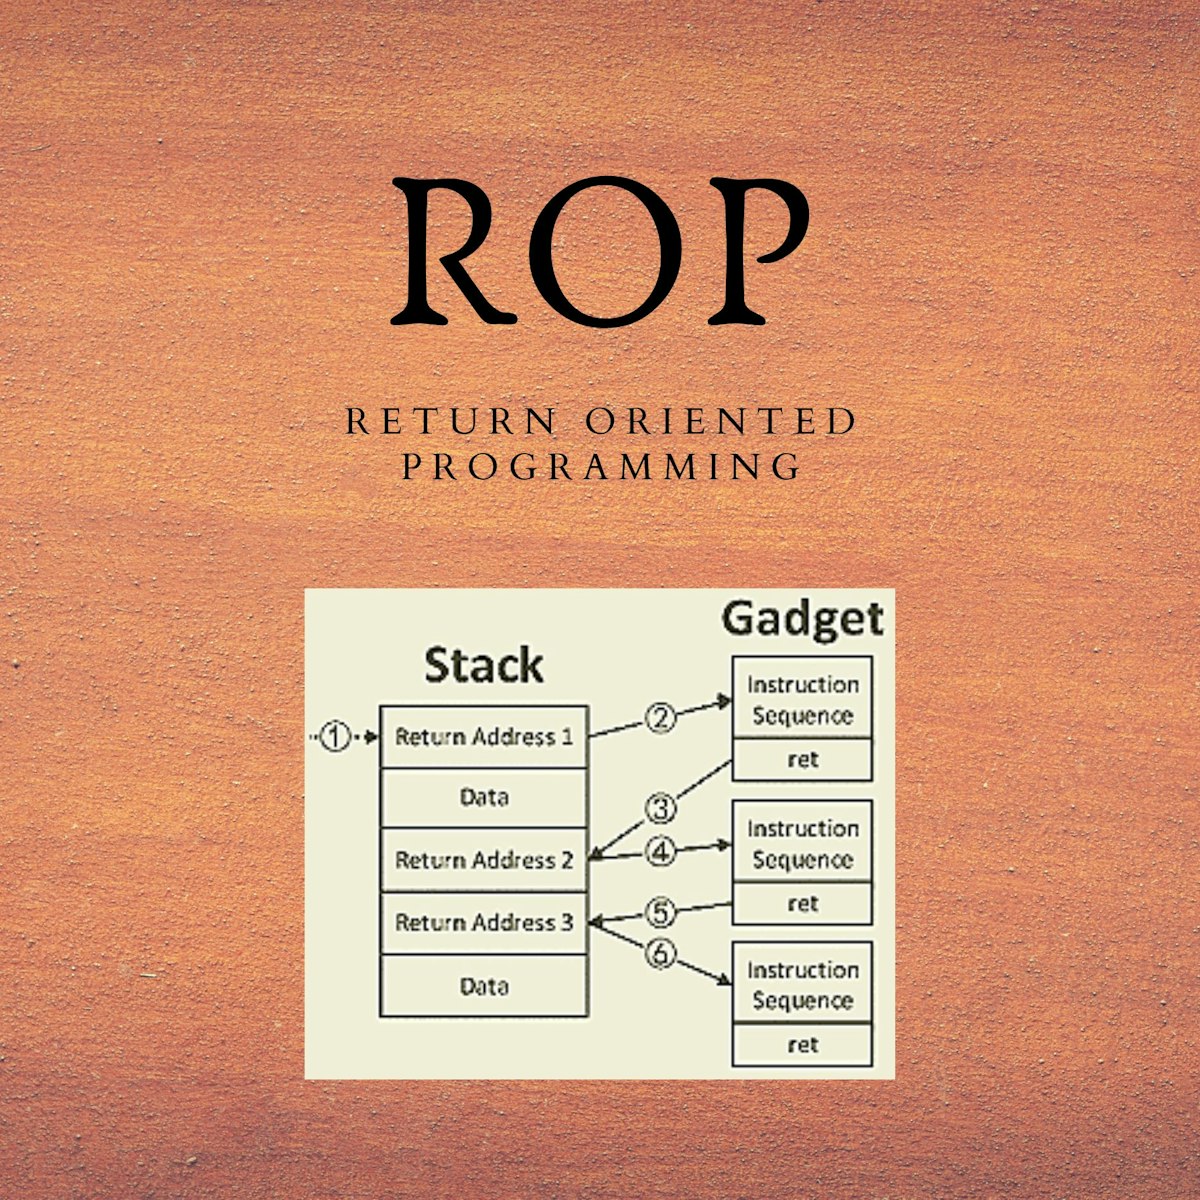 featured image - Implementing A Return Oriented Programming (ROP) Attack: A How-To Guide